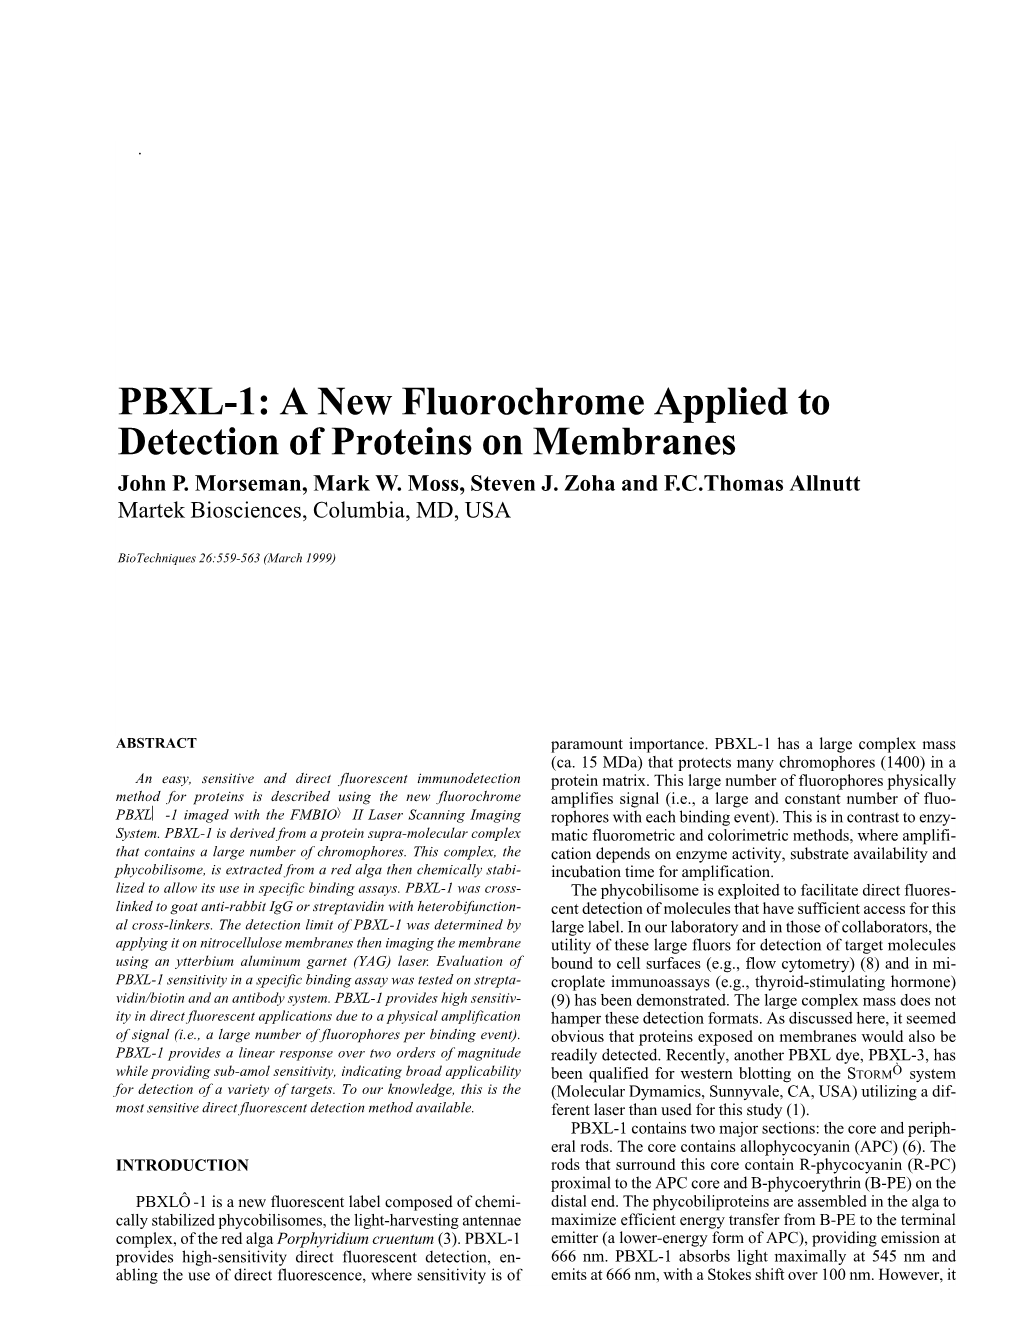 PBXL-1: a New Fluorochrome Applied to Detection of Proteins on Membranes John P